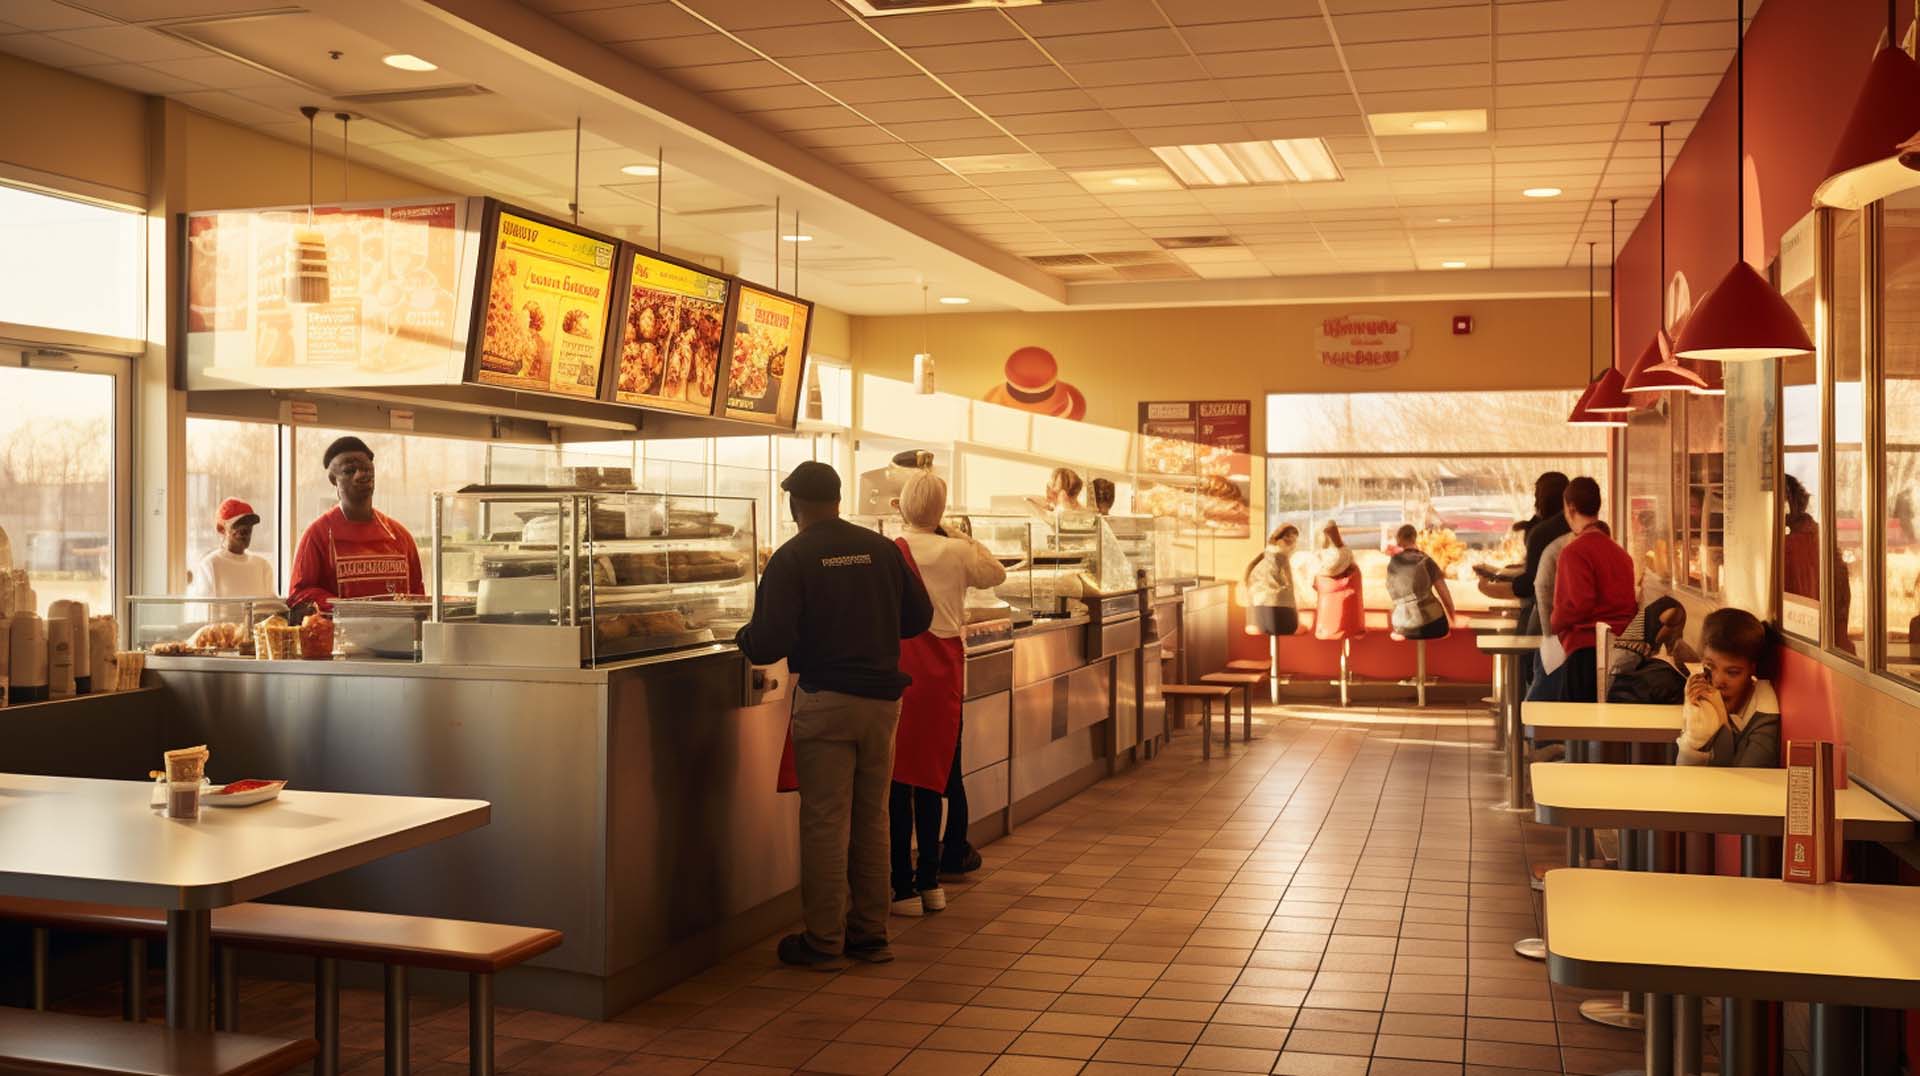 Pasadena has a wide variety of delicious fast food options to choose from.